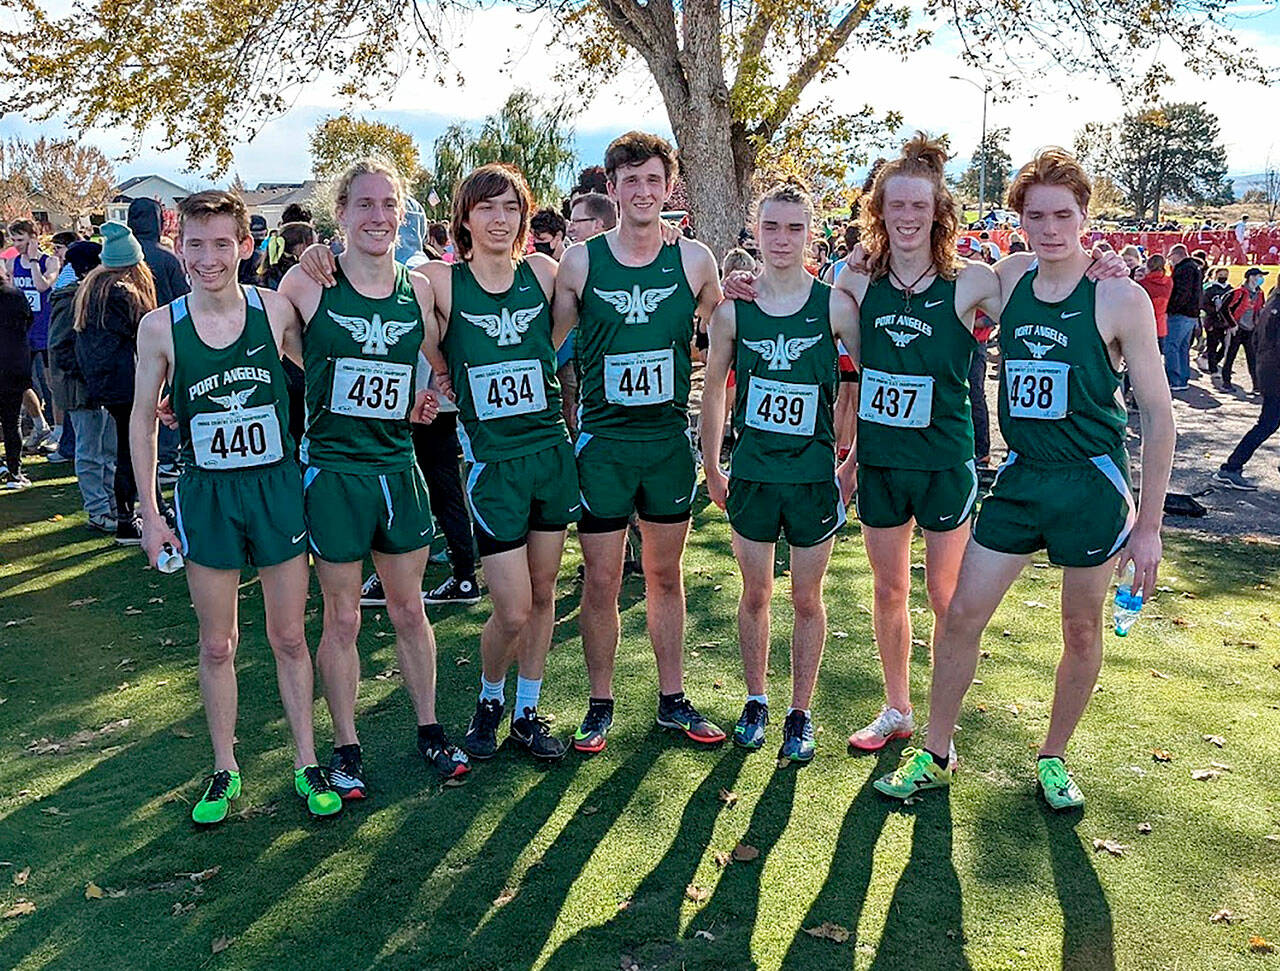 The Port Angeles boys cross-country team finished fifth in the state at the 2A state championships Saturday. From left, are Langdon Larson, Josh Gavin, Max Baeder, Naaman McGuffey, Kowen Kasten, Jack Gladfelter and Jason Gladfelter. (Photo courtesy of Rodger Johnson)